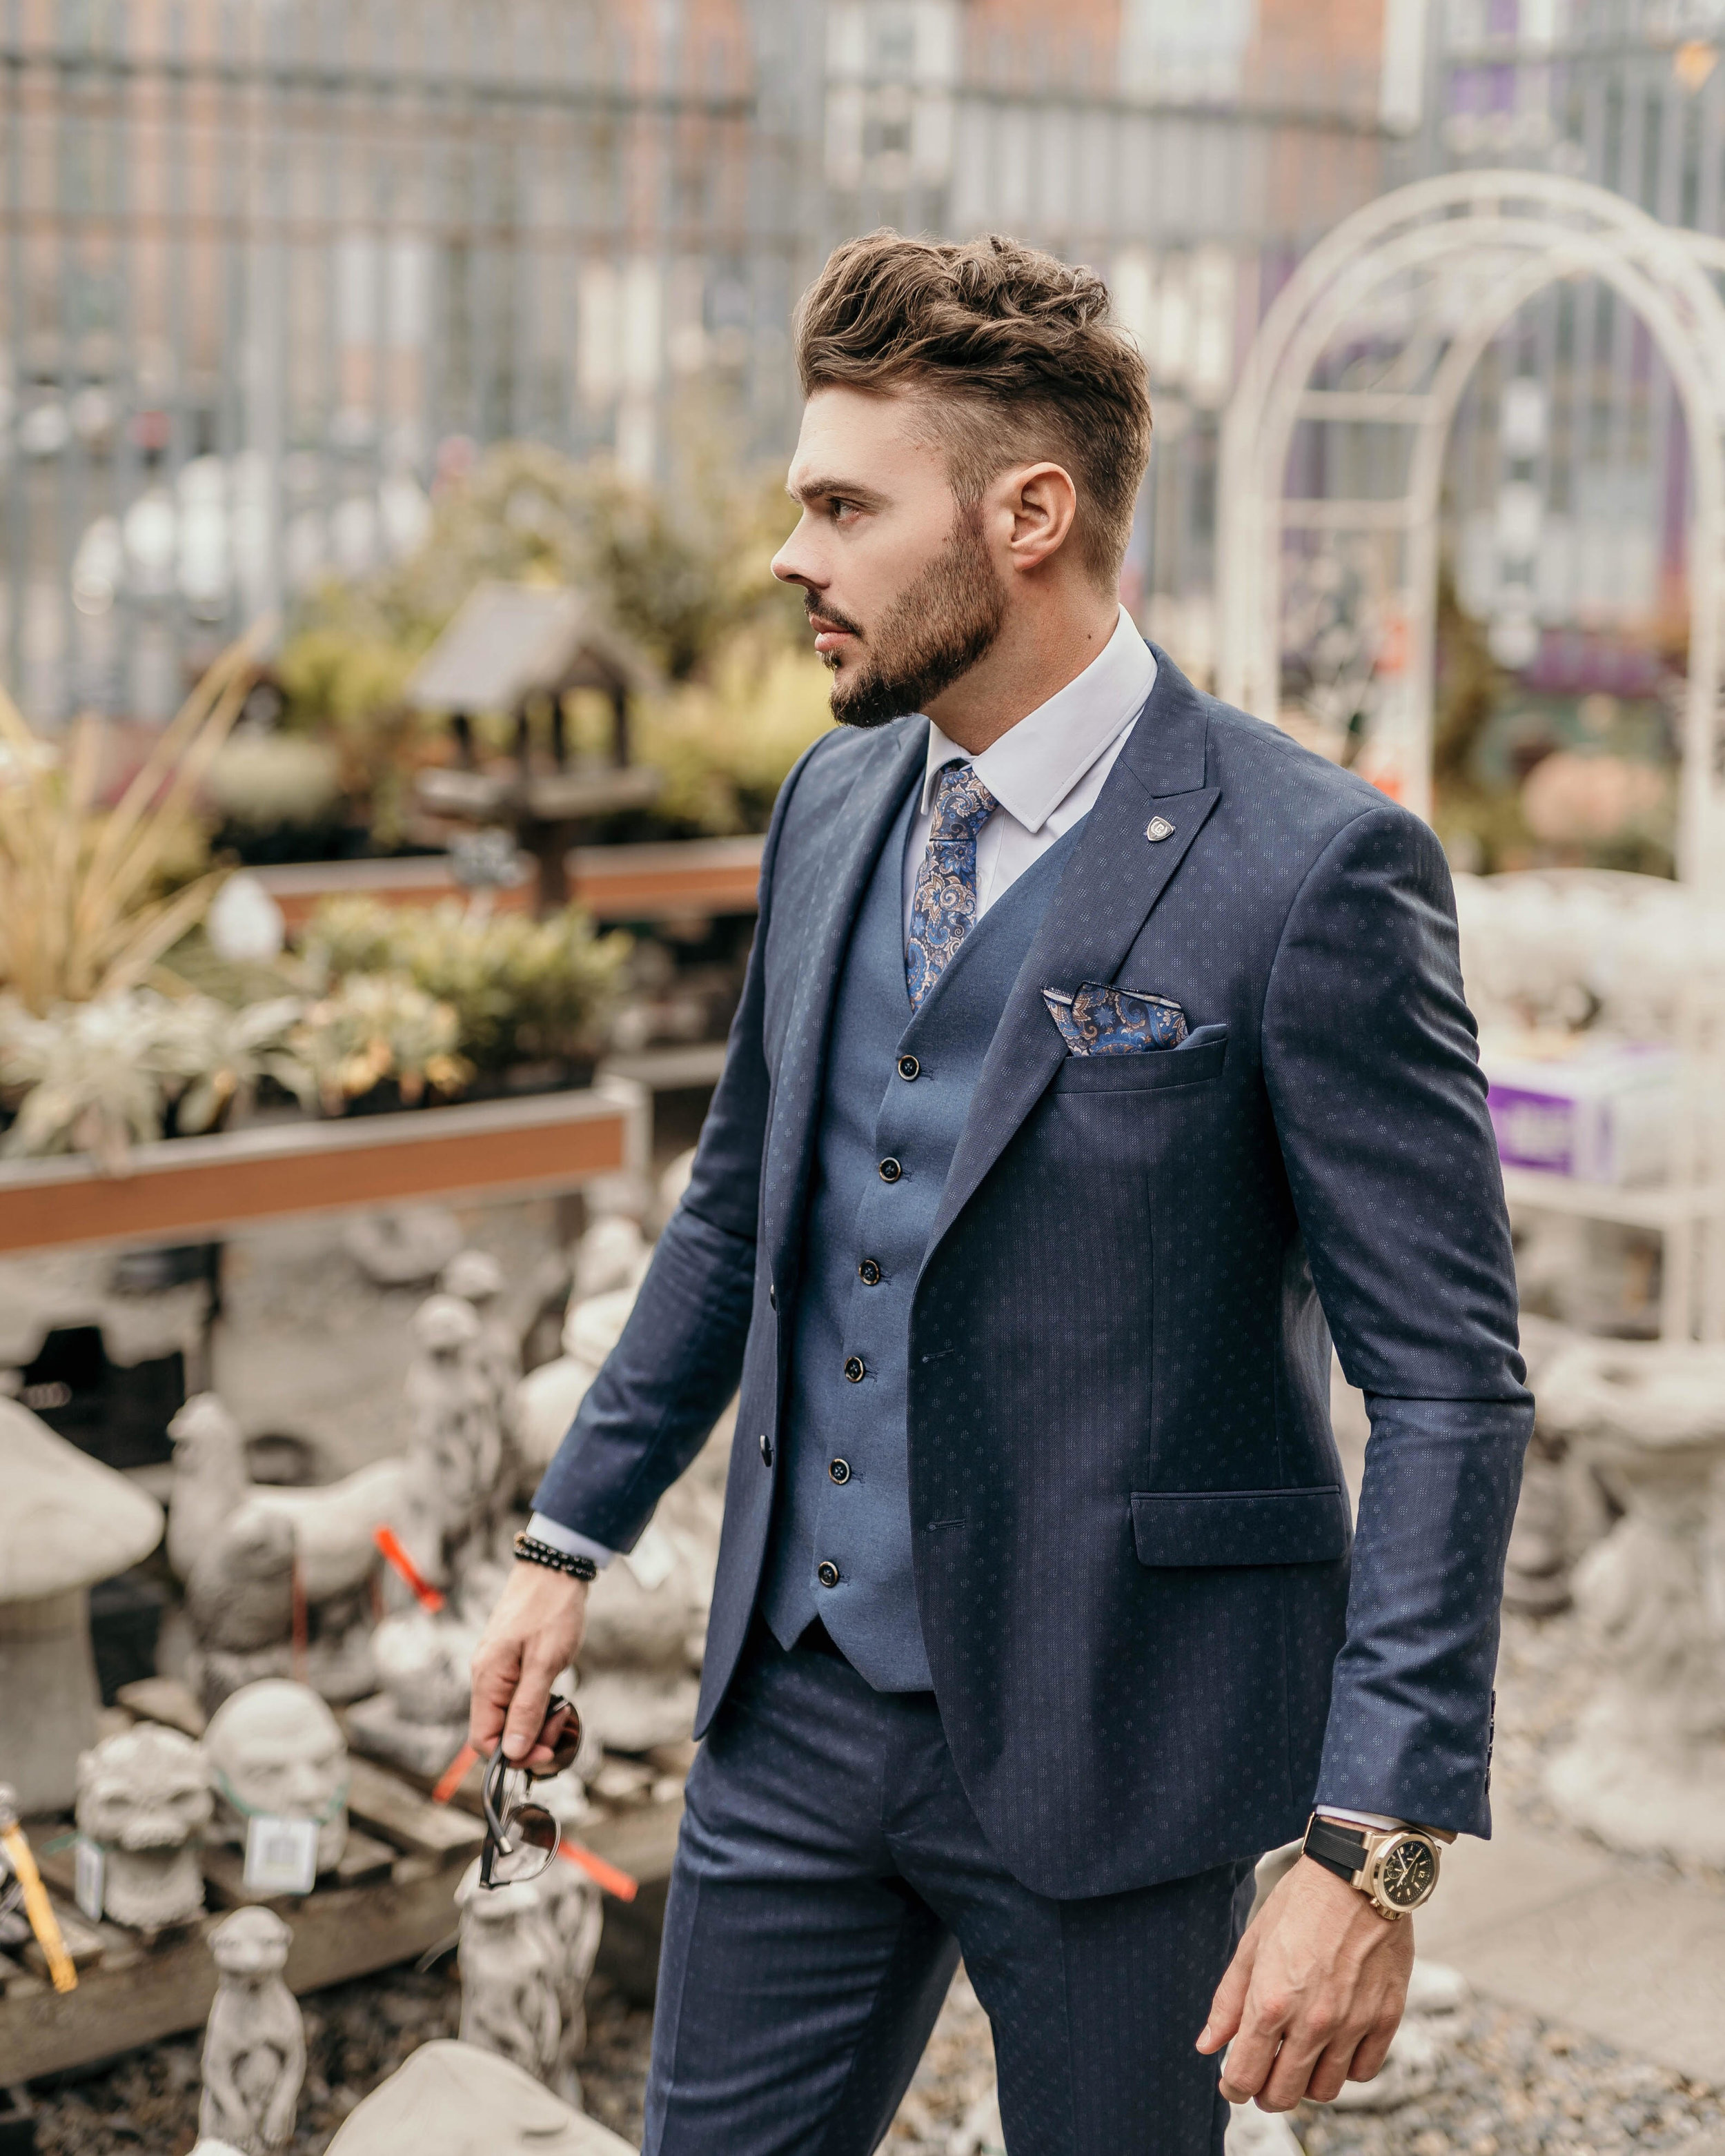 winter wedding attire for male guests